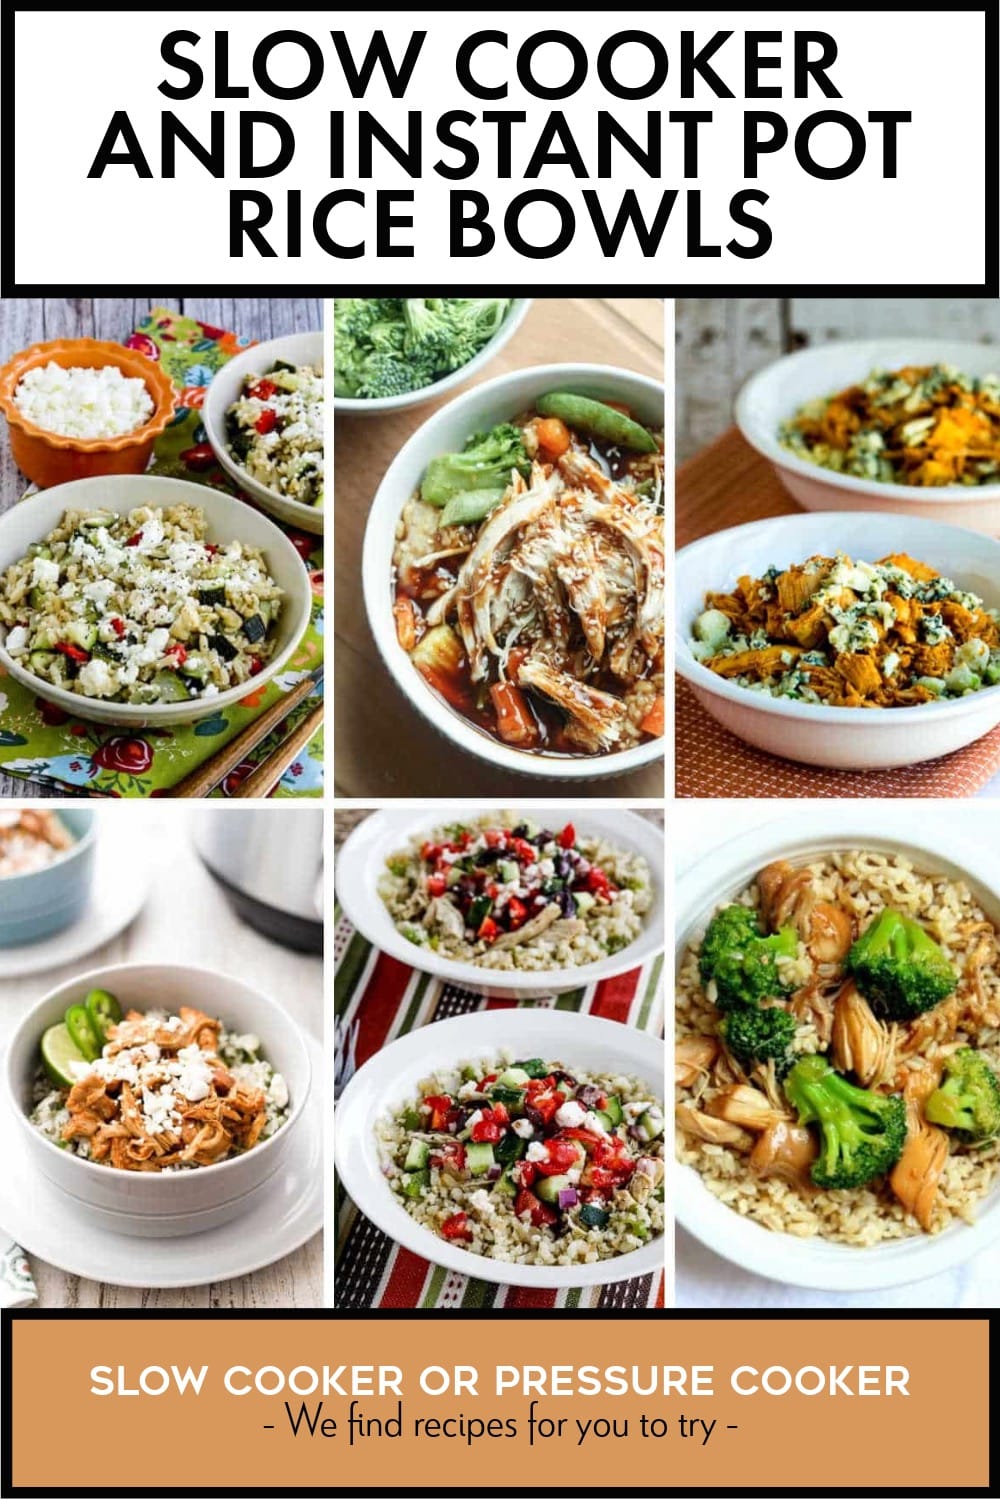 Pinterest image of Slow Cooker and Instant Pot Rice Bowls